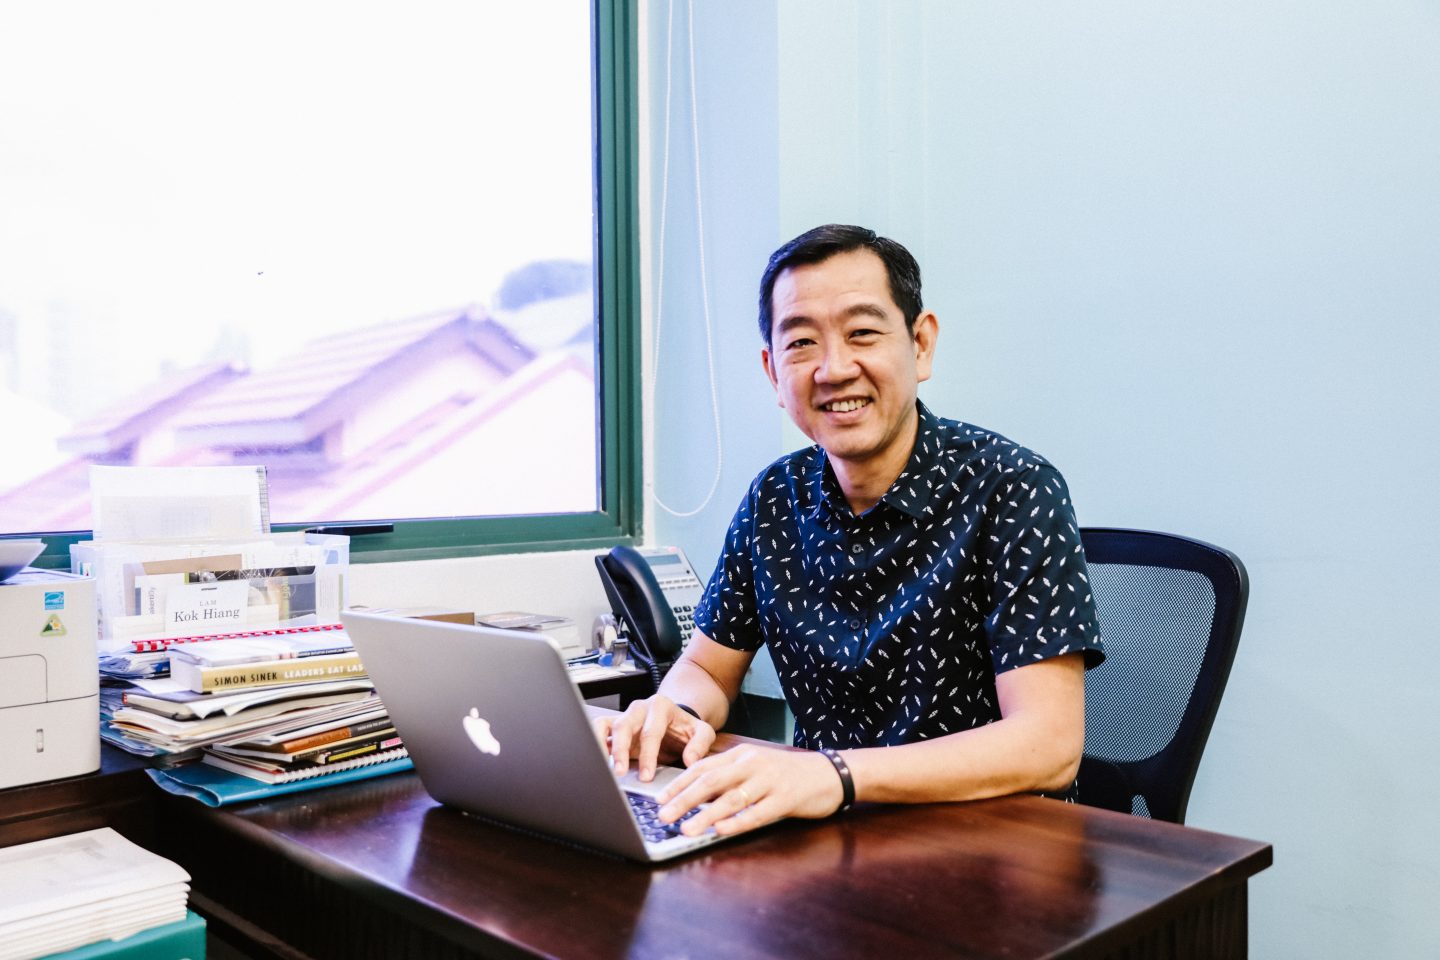 Current Cru Singapore's country leader Lam Kok Hiang in his office 